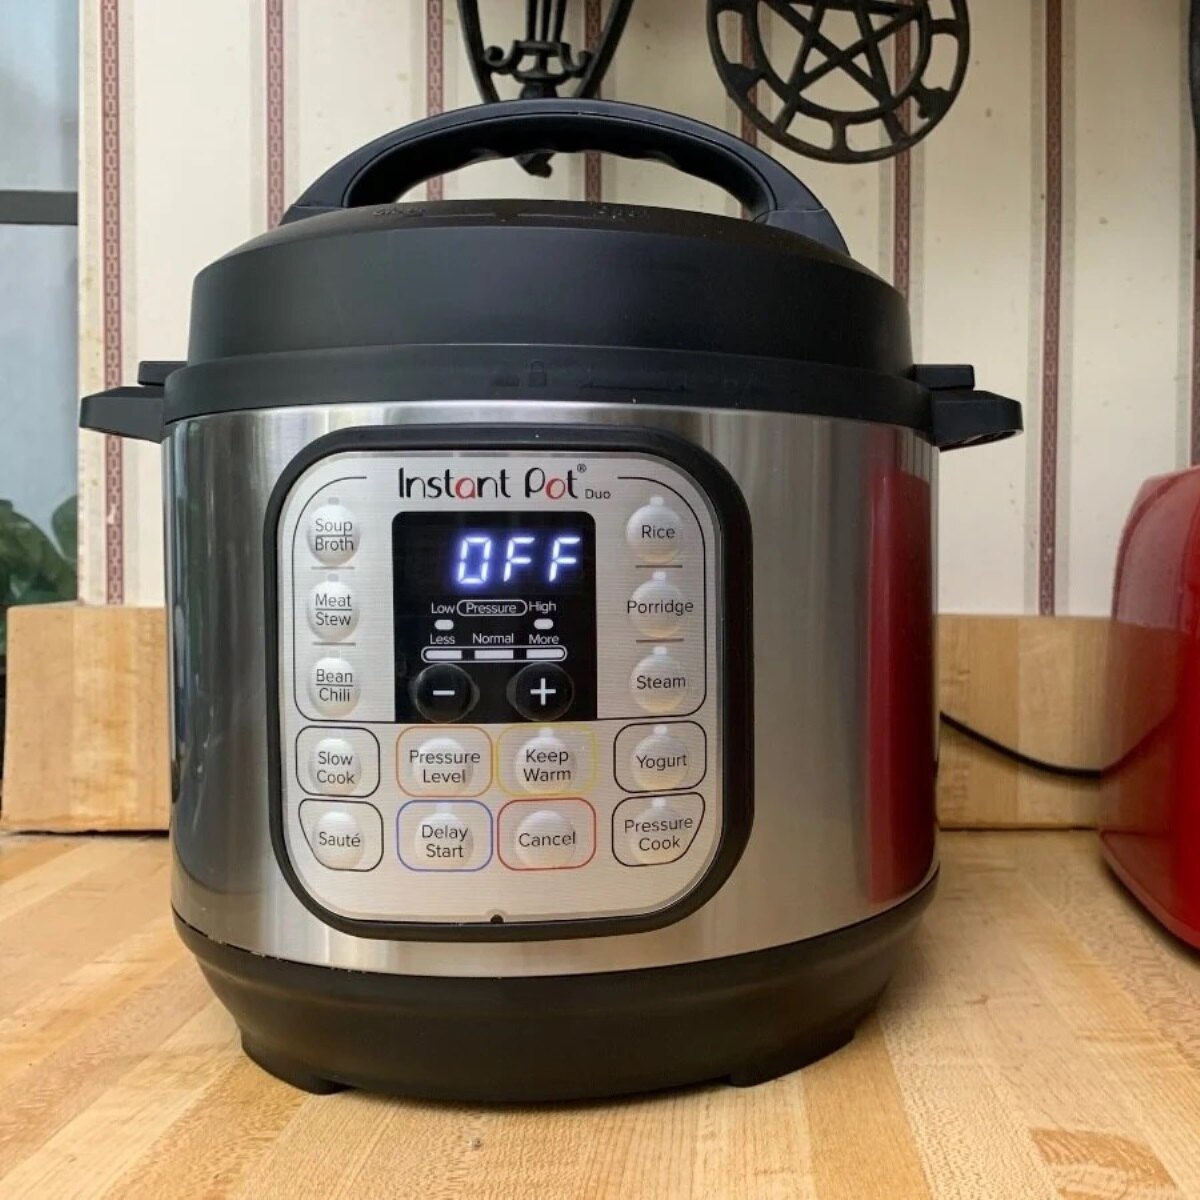 the instant pot is off